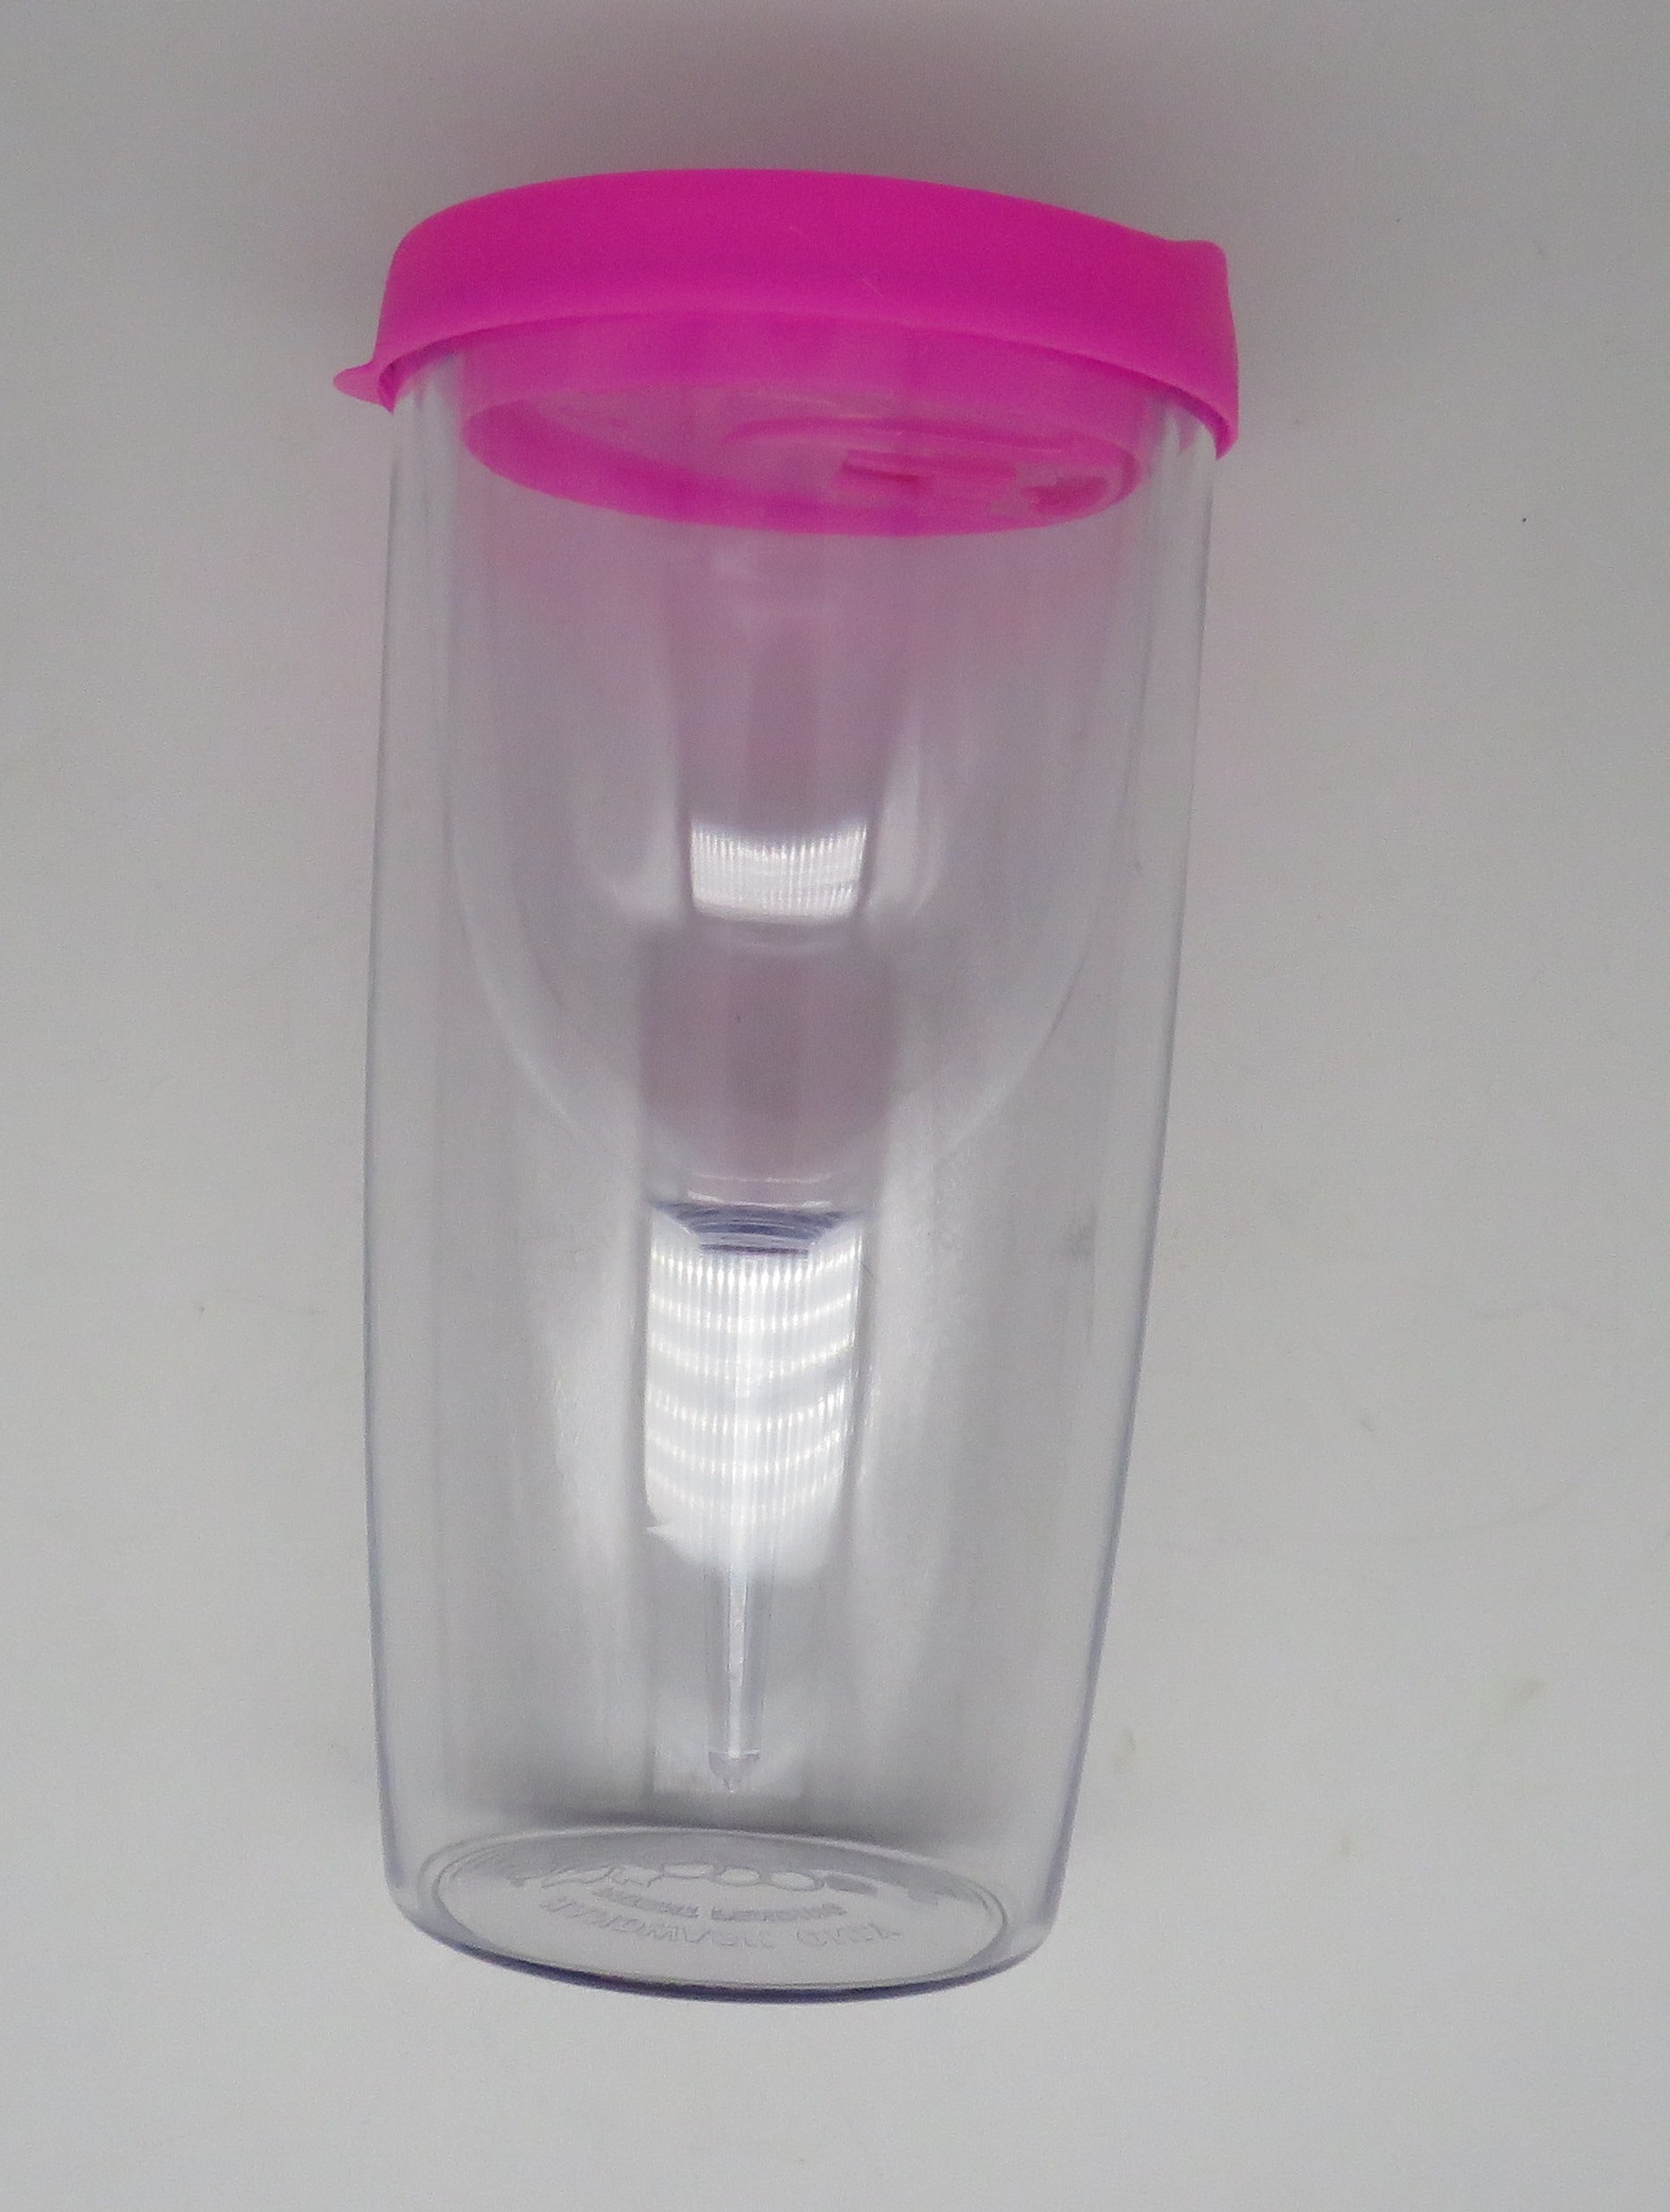 Vino2Go Wine Glass Tumbler With Lids PINK Acrylic Insulated (For the Boat)